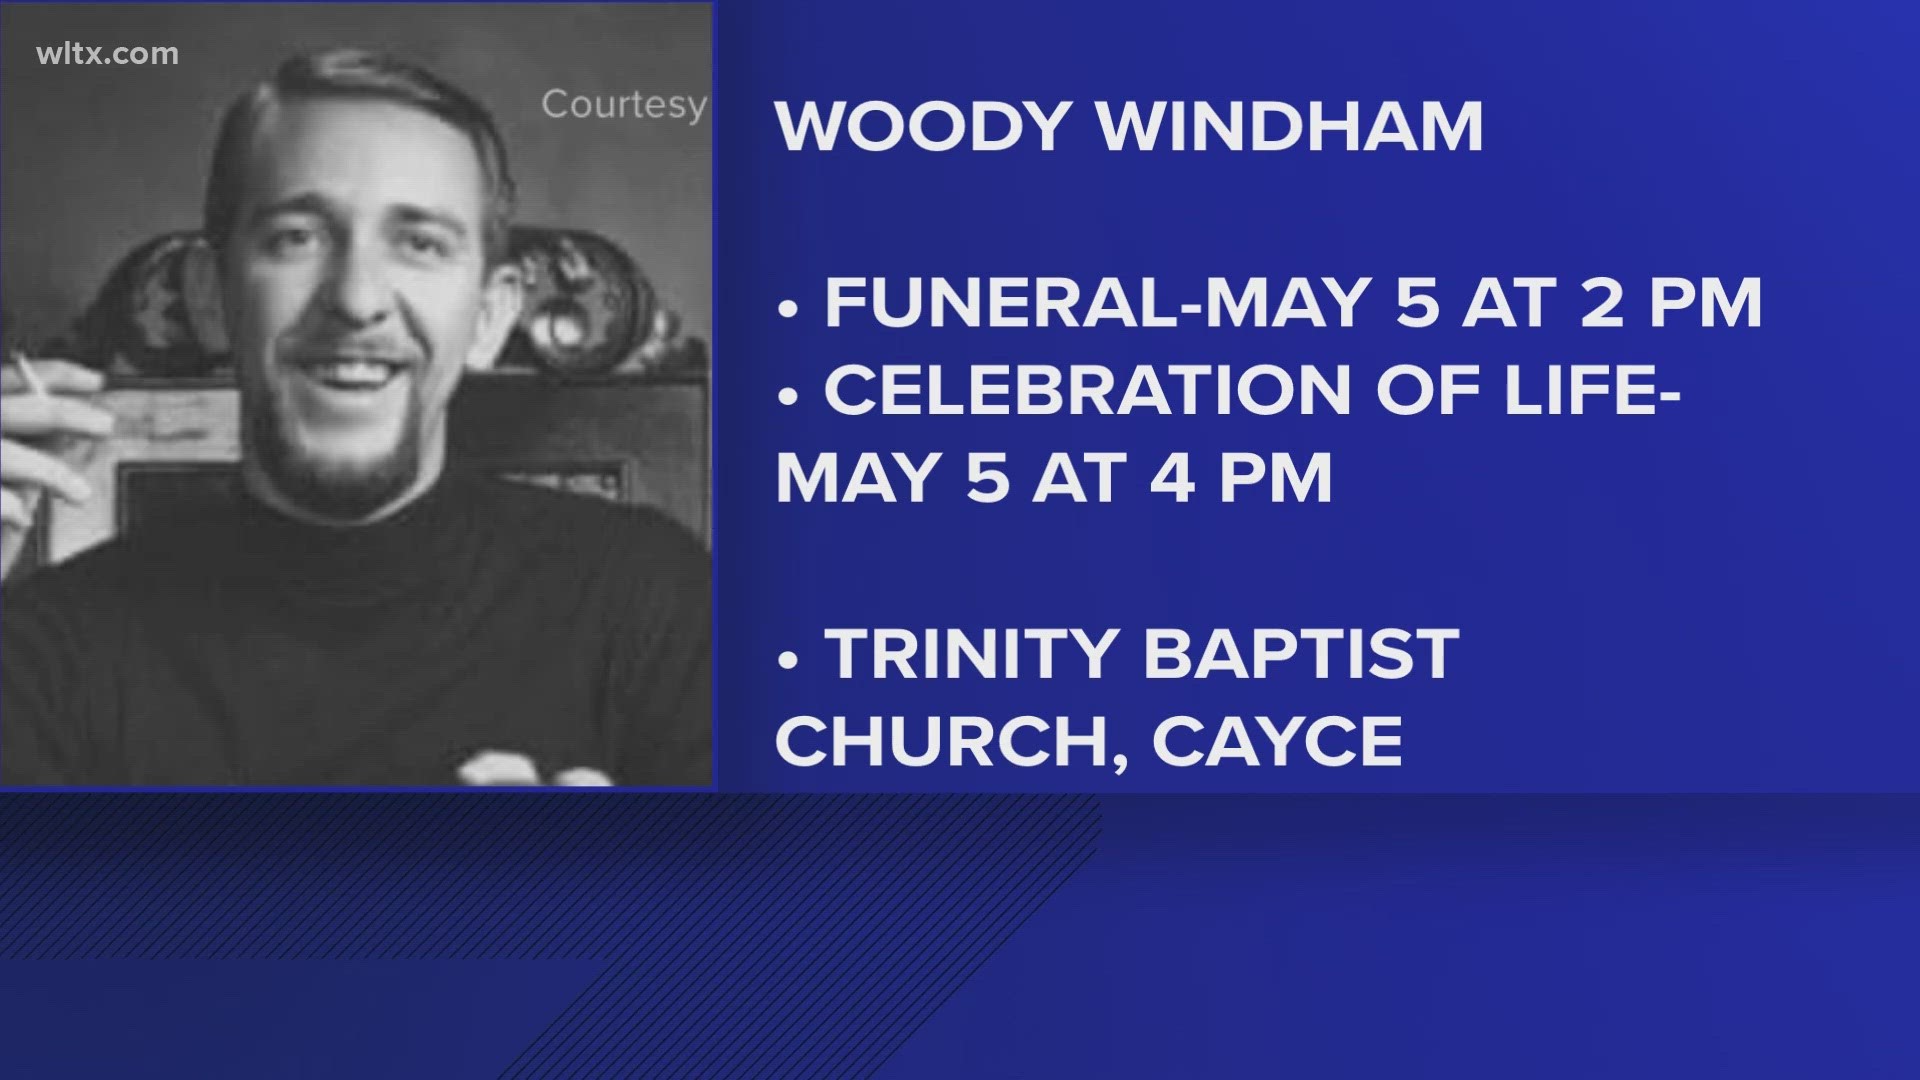 The funeral will be on Sunday, May 5th at 2 pm at Trinity Baptist Church in Cayce followed by a gathering at The Woody on Main.